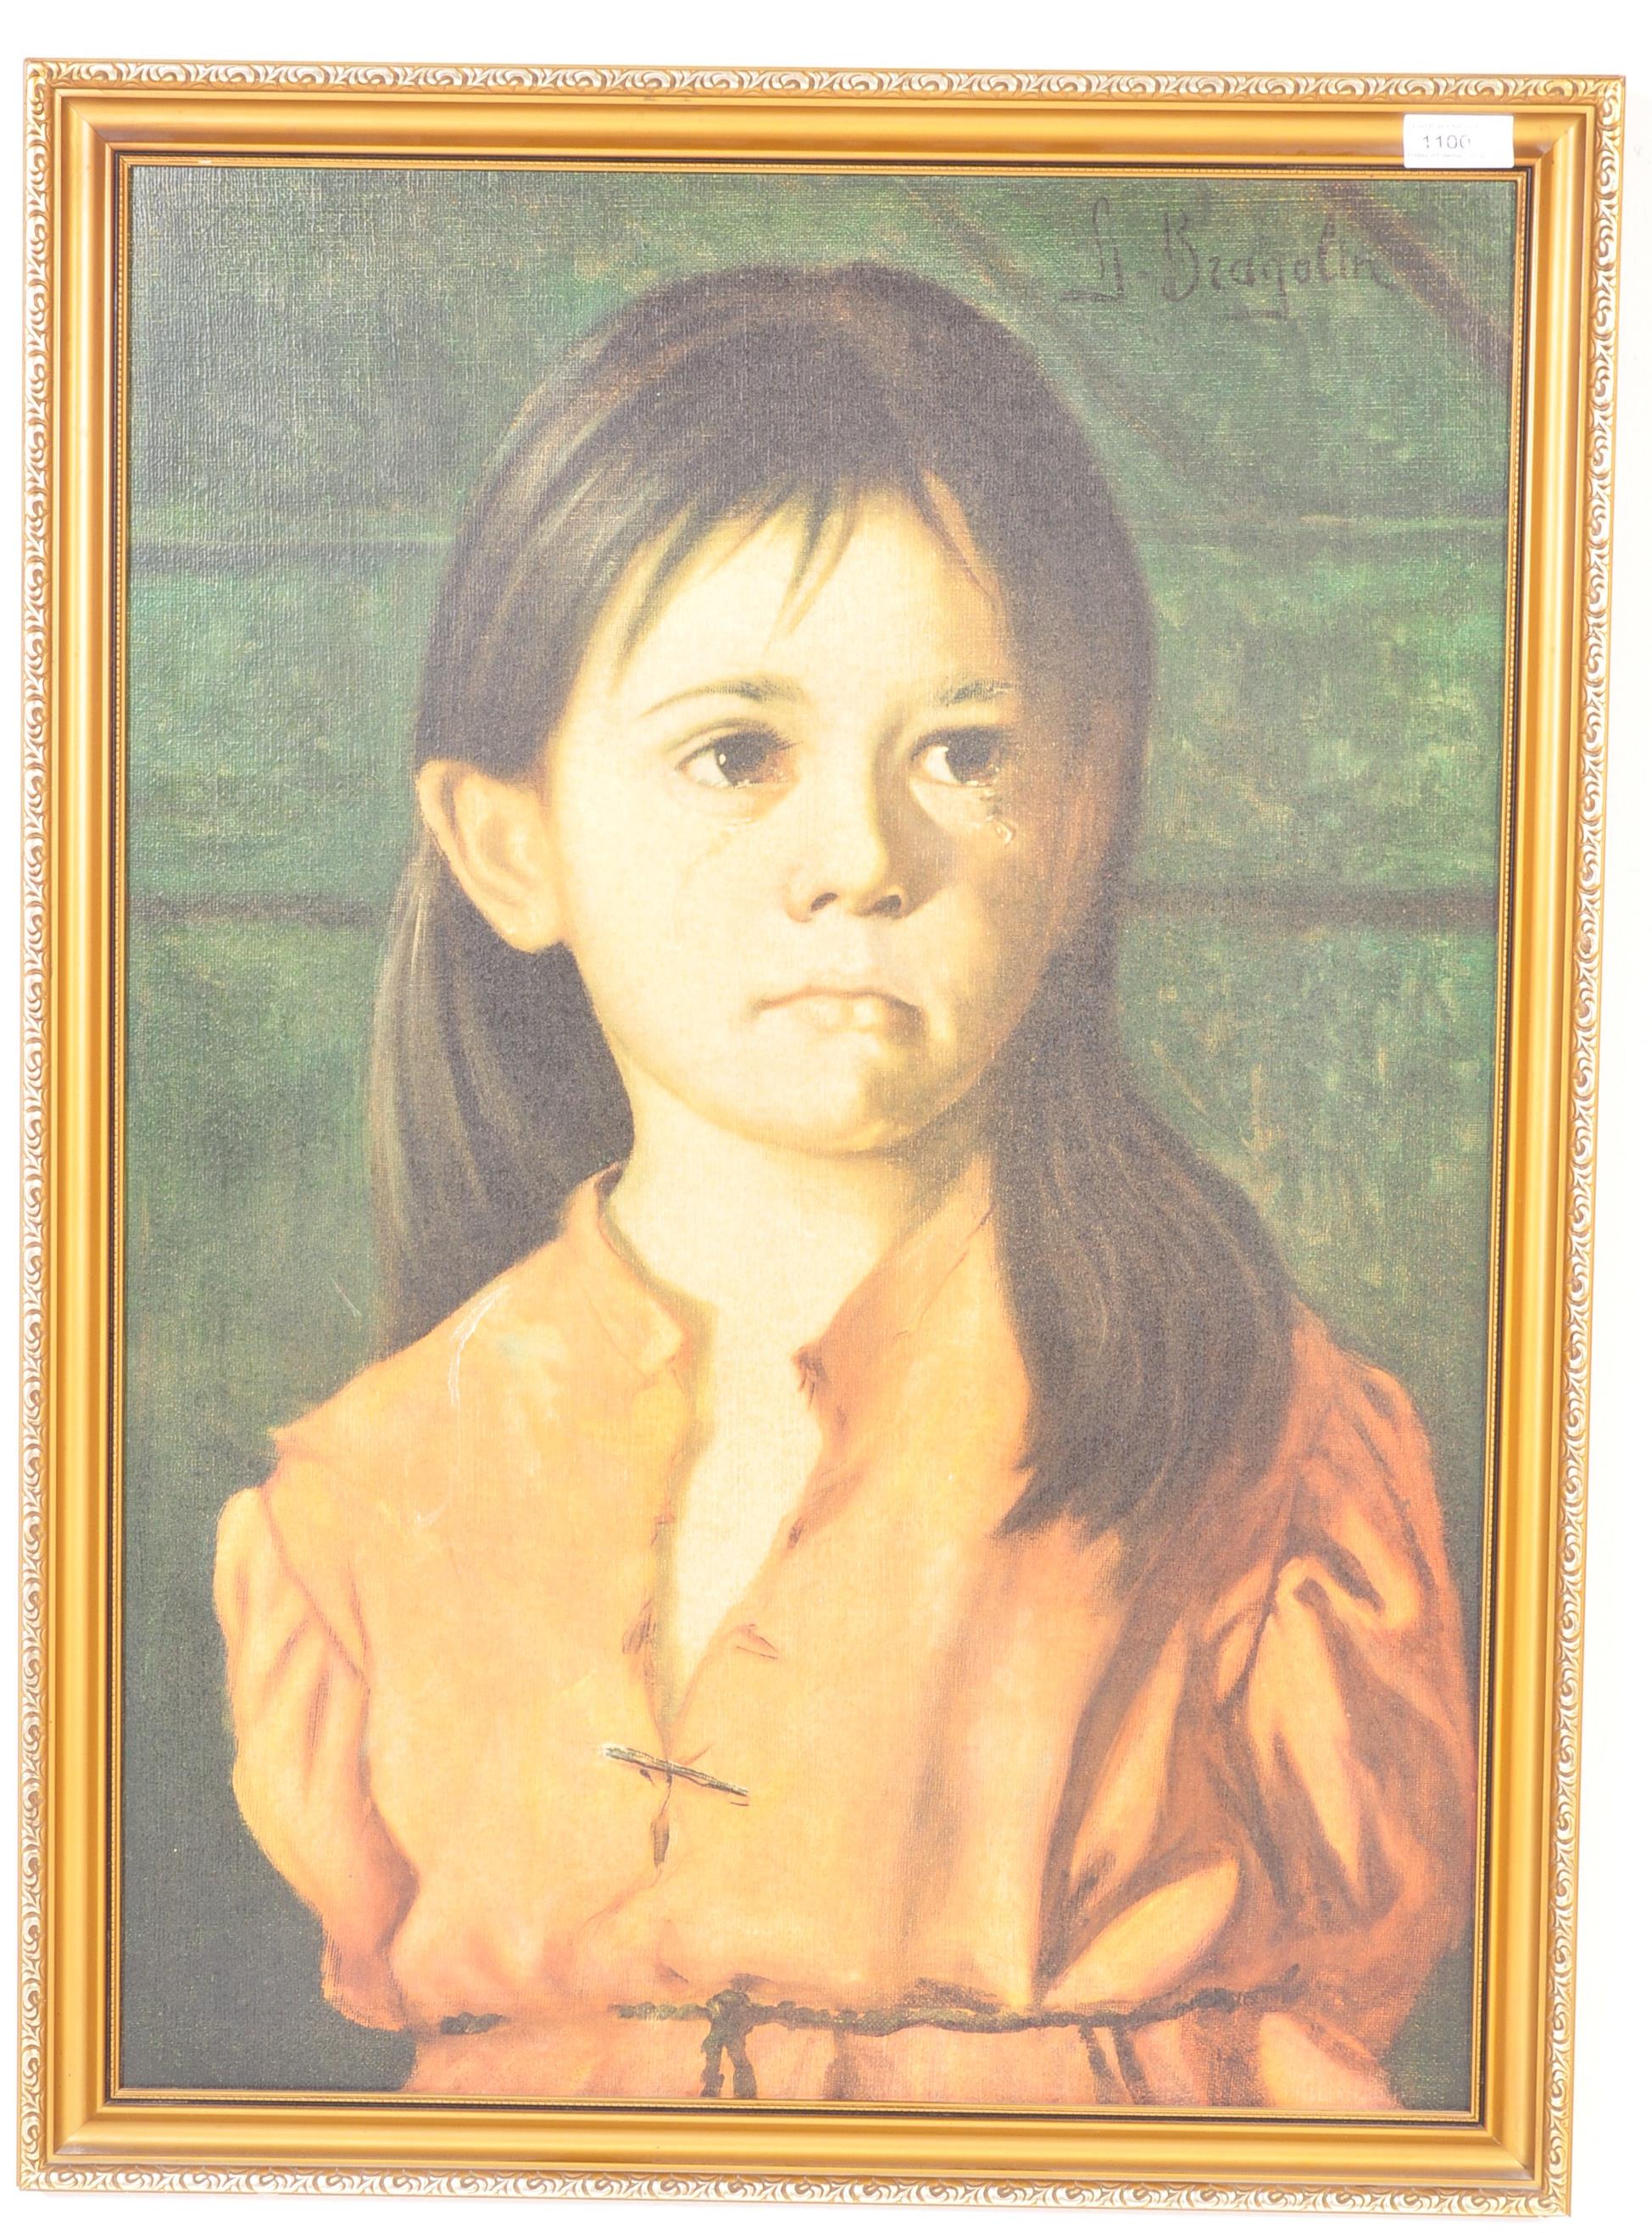 AFTER GIOVANNI BRAGOLIN - VINTAGE 20TH CENTURY 1960S BOOTS PRINT OF A YOUNG GIRL CRYING - Image 2 of 7